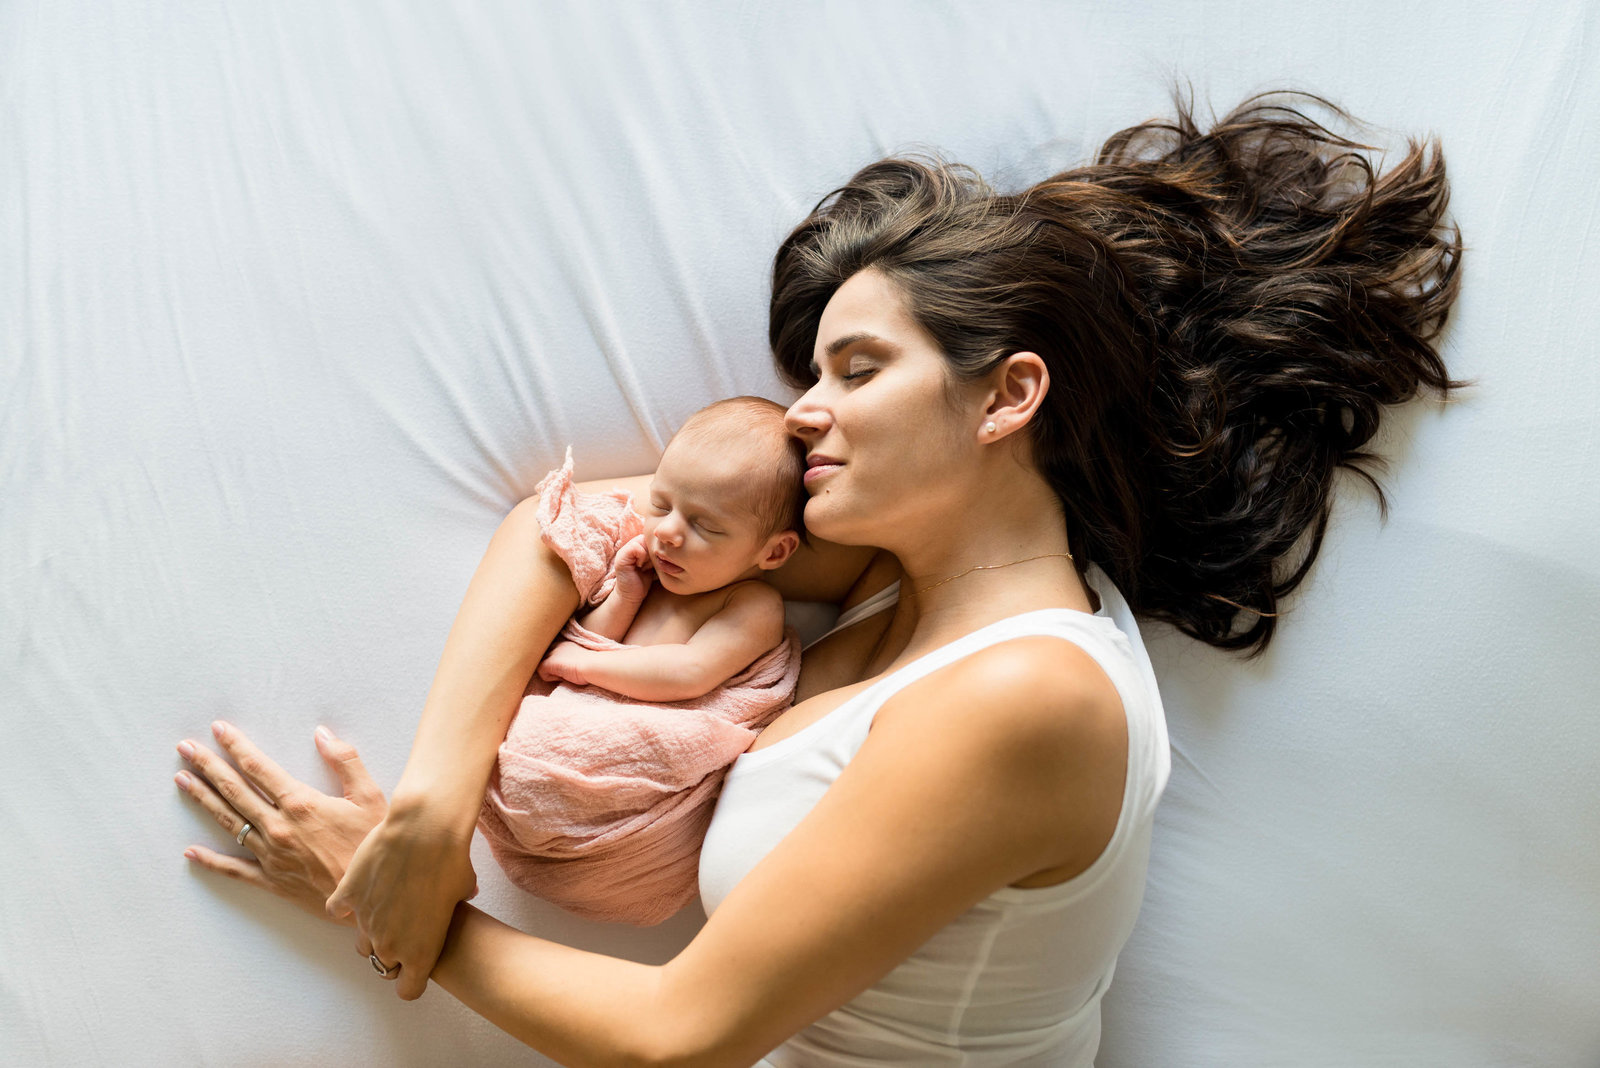 Mom holding newborn lying on bed with hair